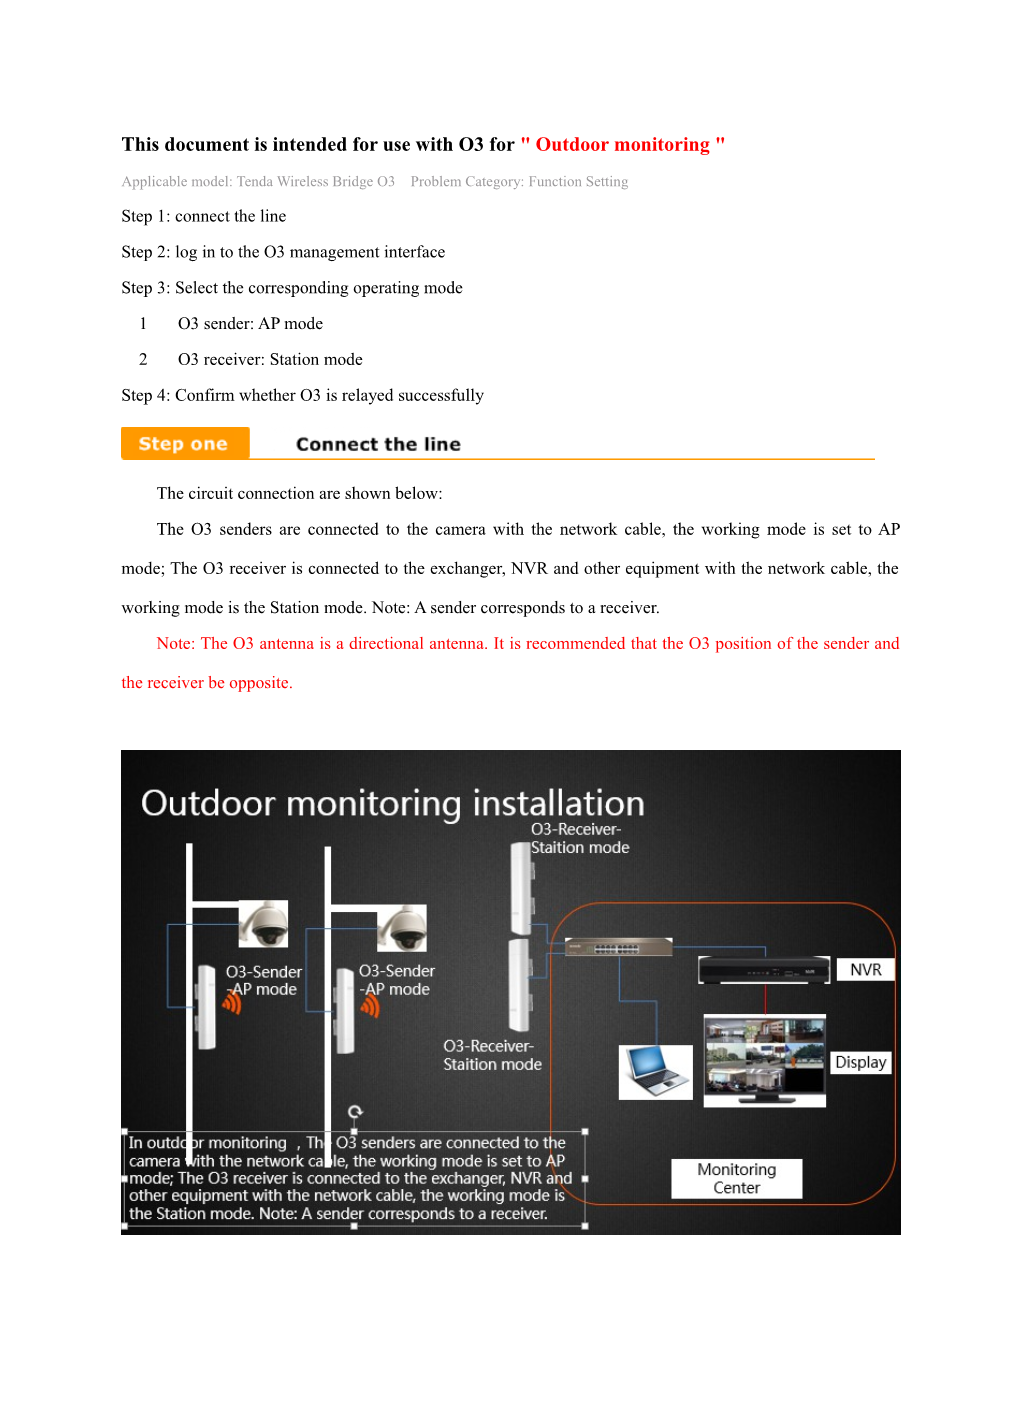 This Document Is Intended for Use with O3 for Outdoor Monitoring